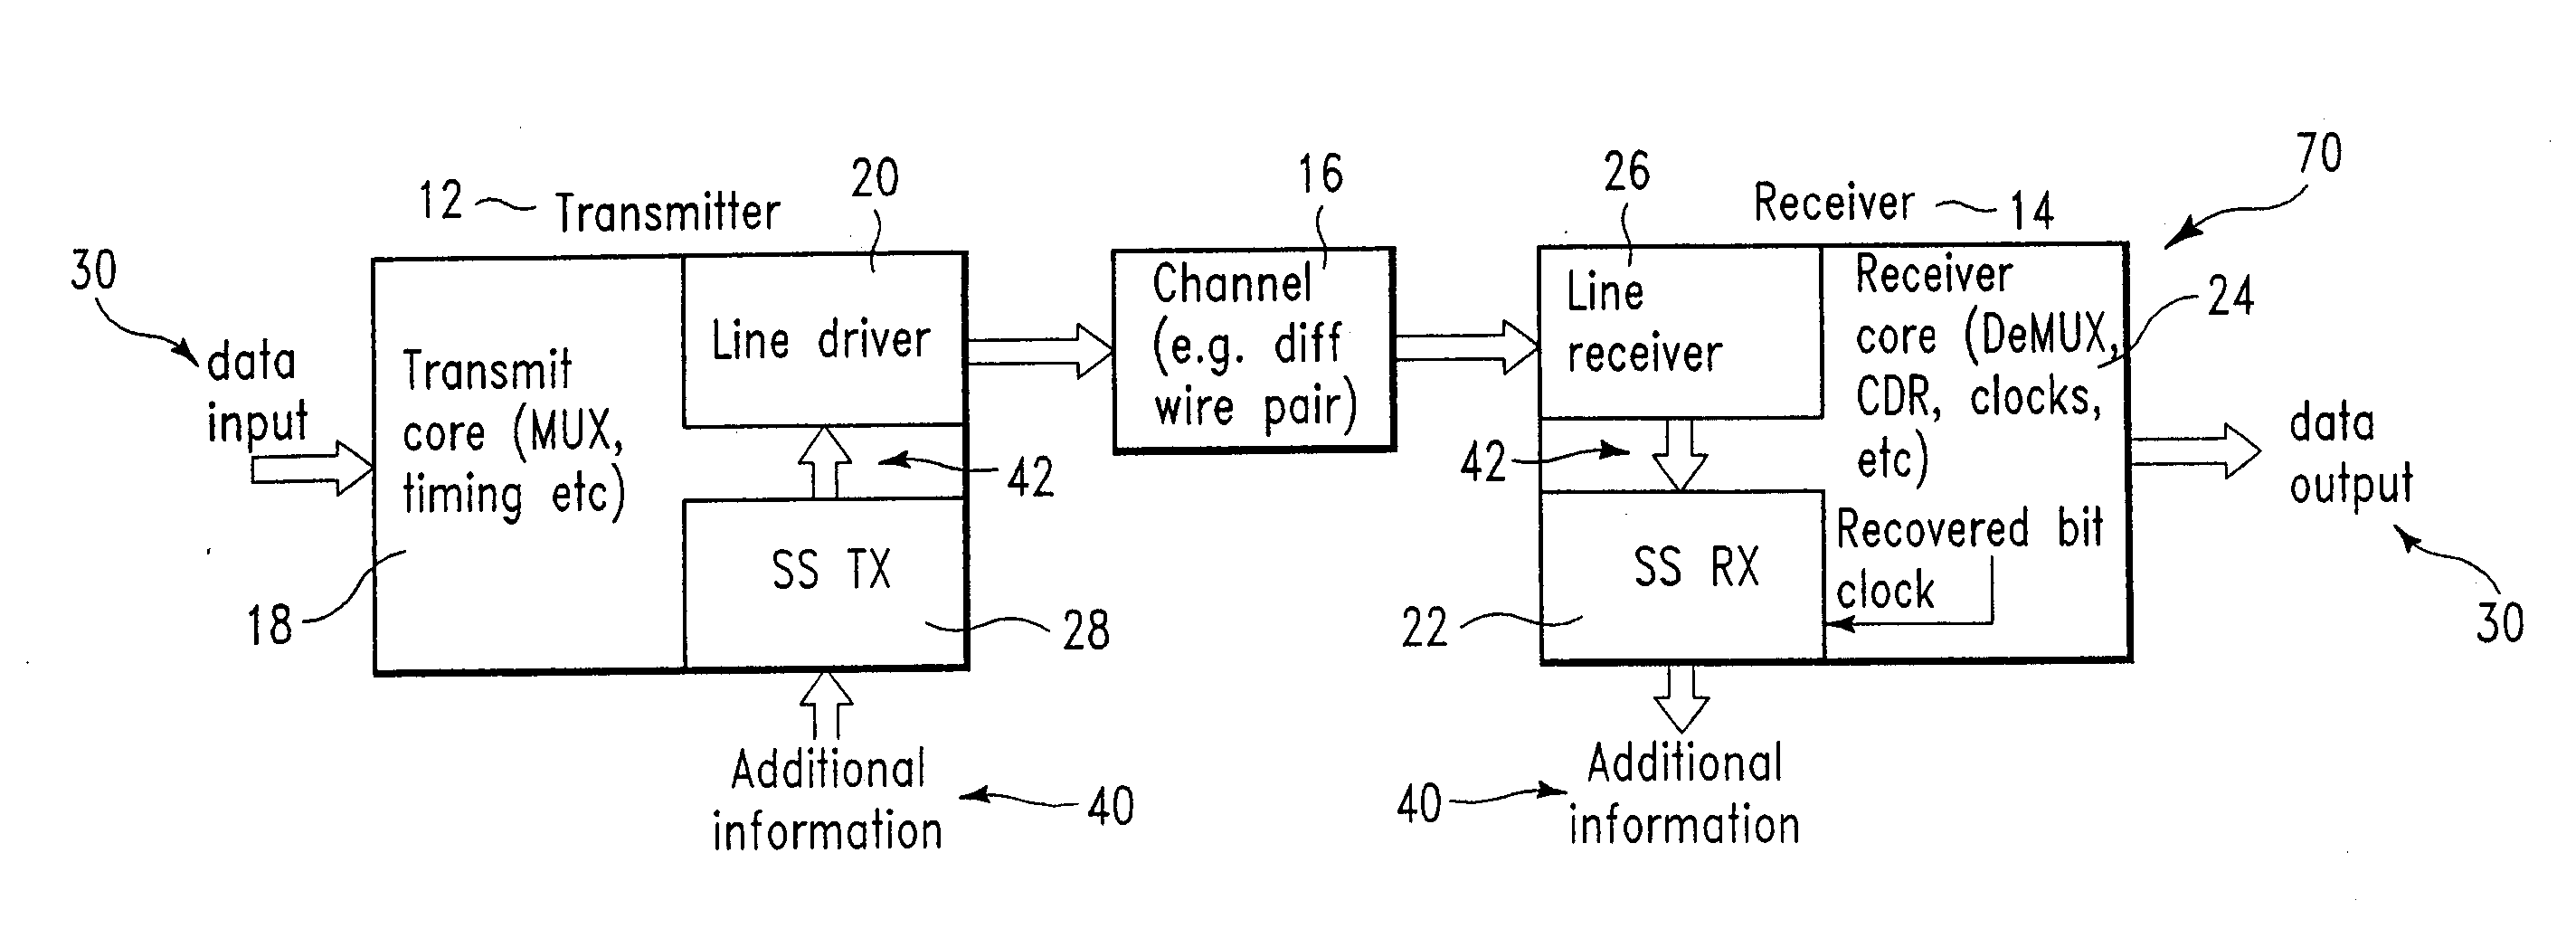 Apparatus for transmitting data and additional information simultaneously within a wire-based communication system